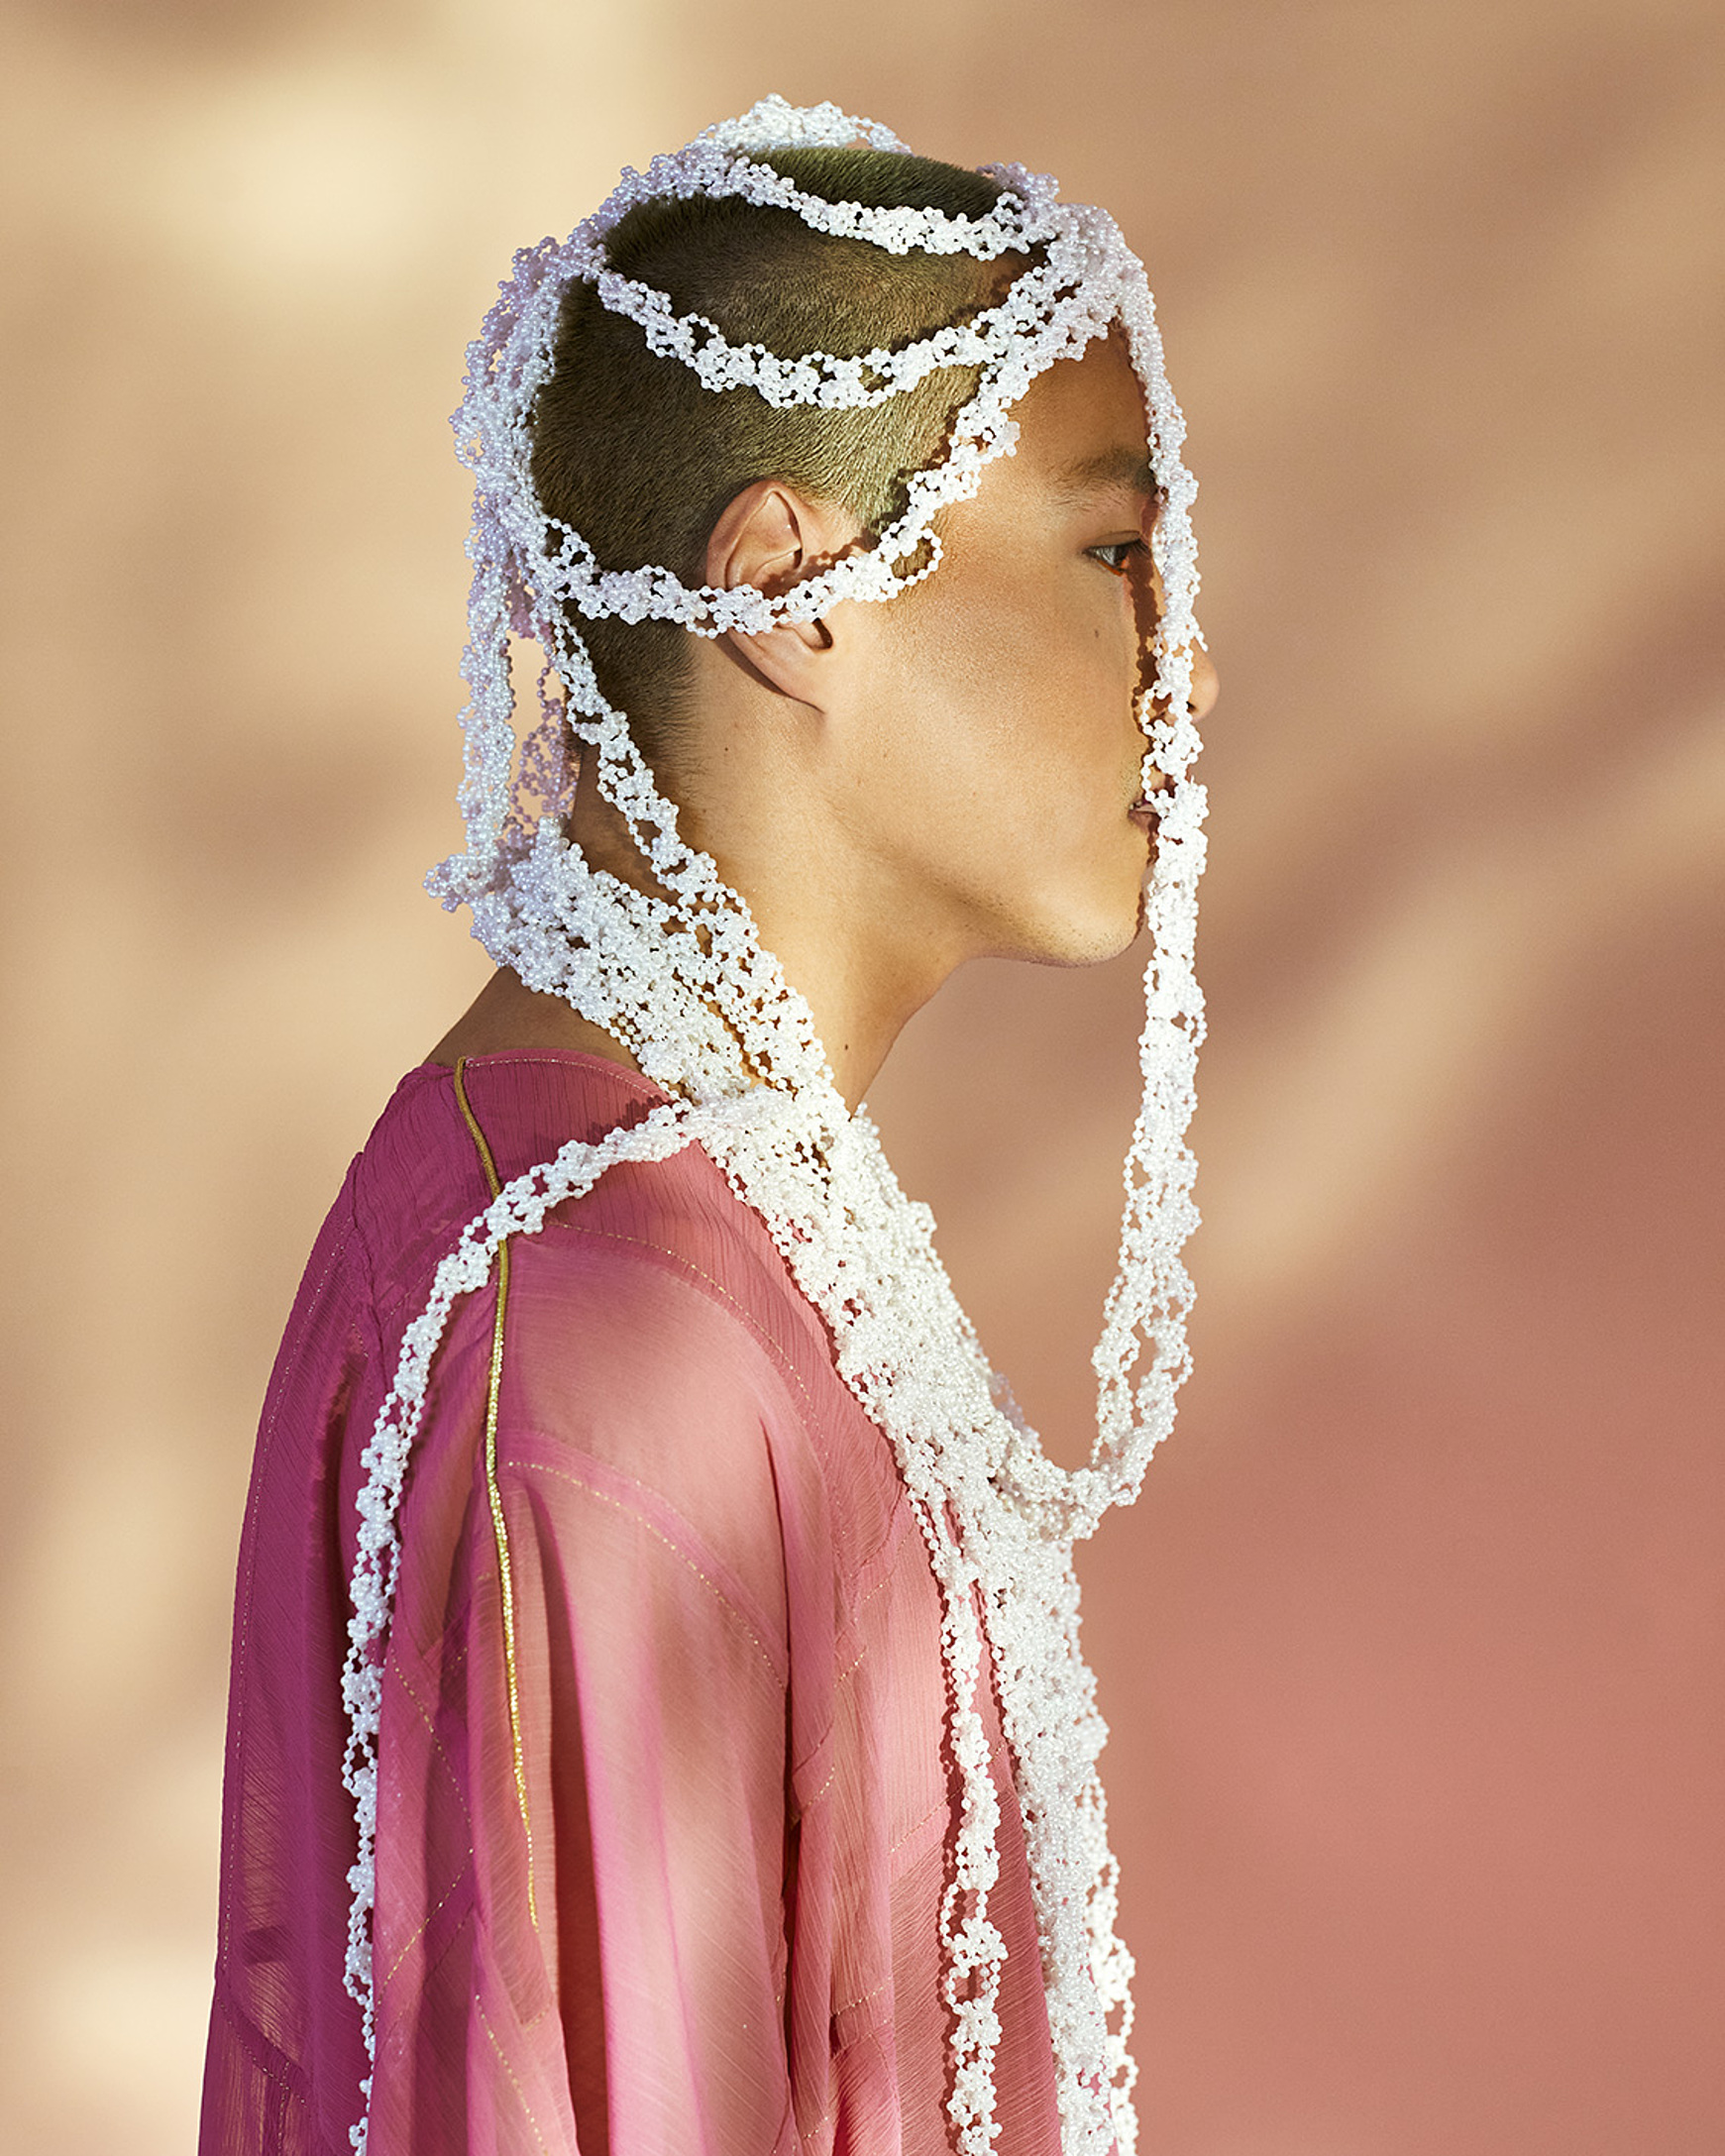 a portrait from a model with a white headpiece